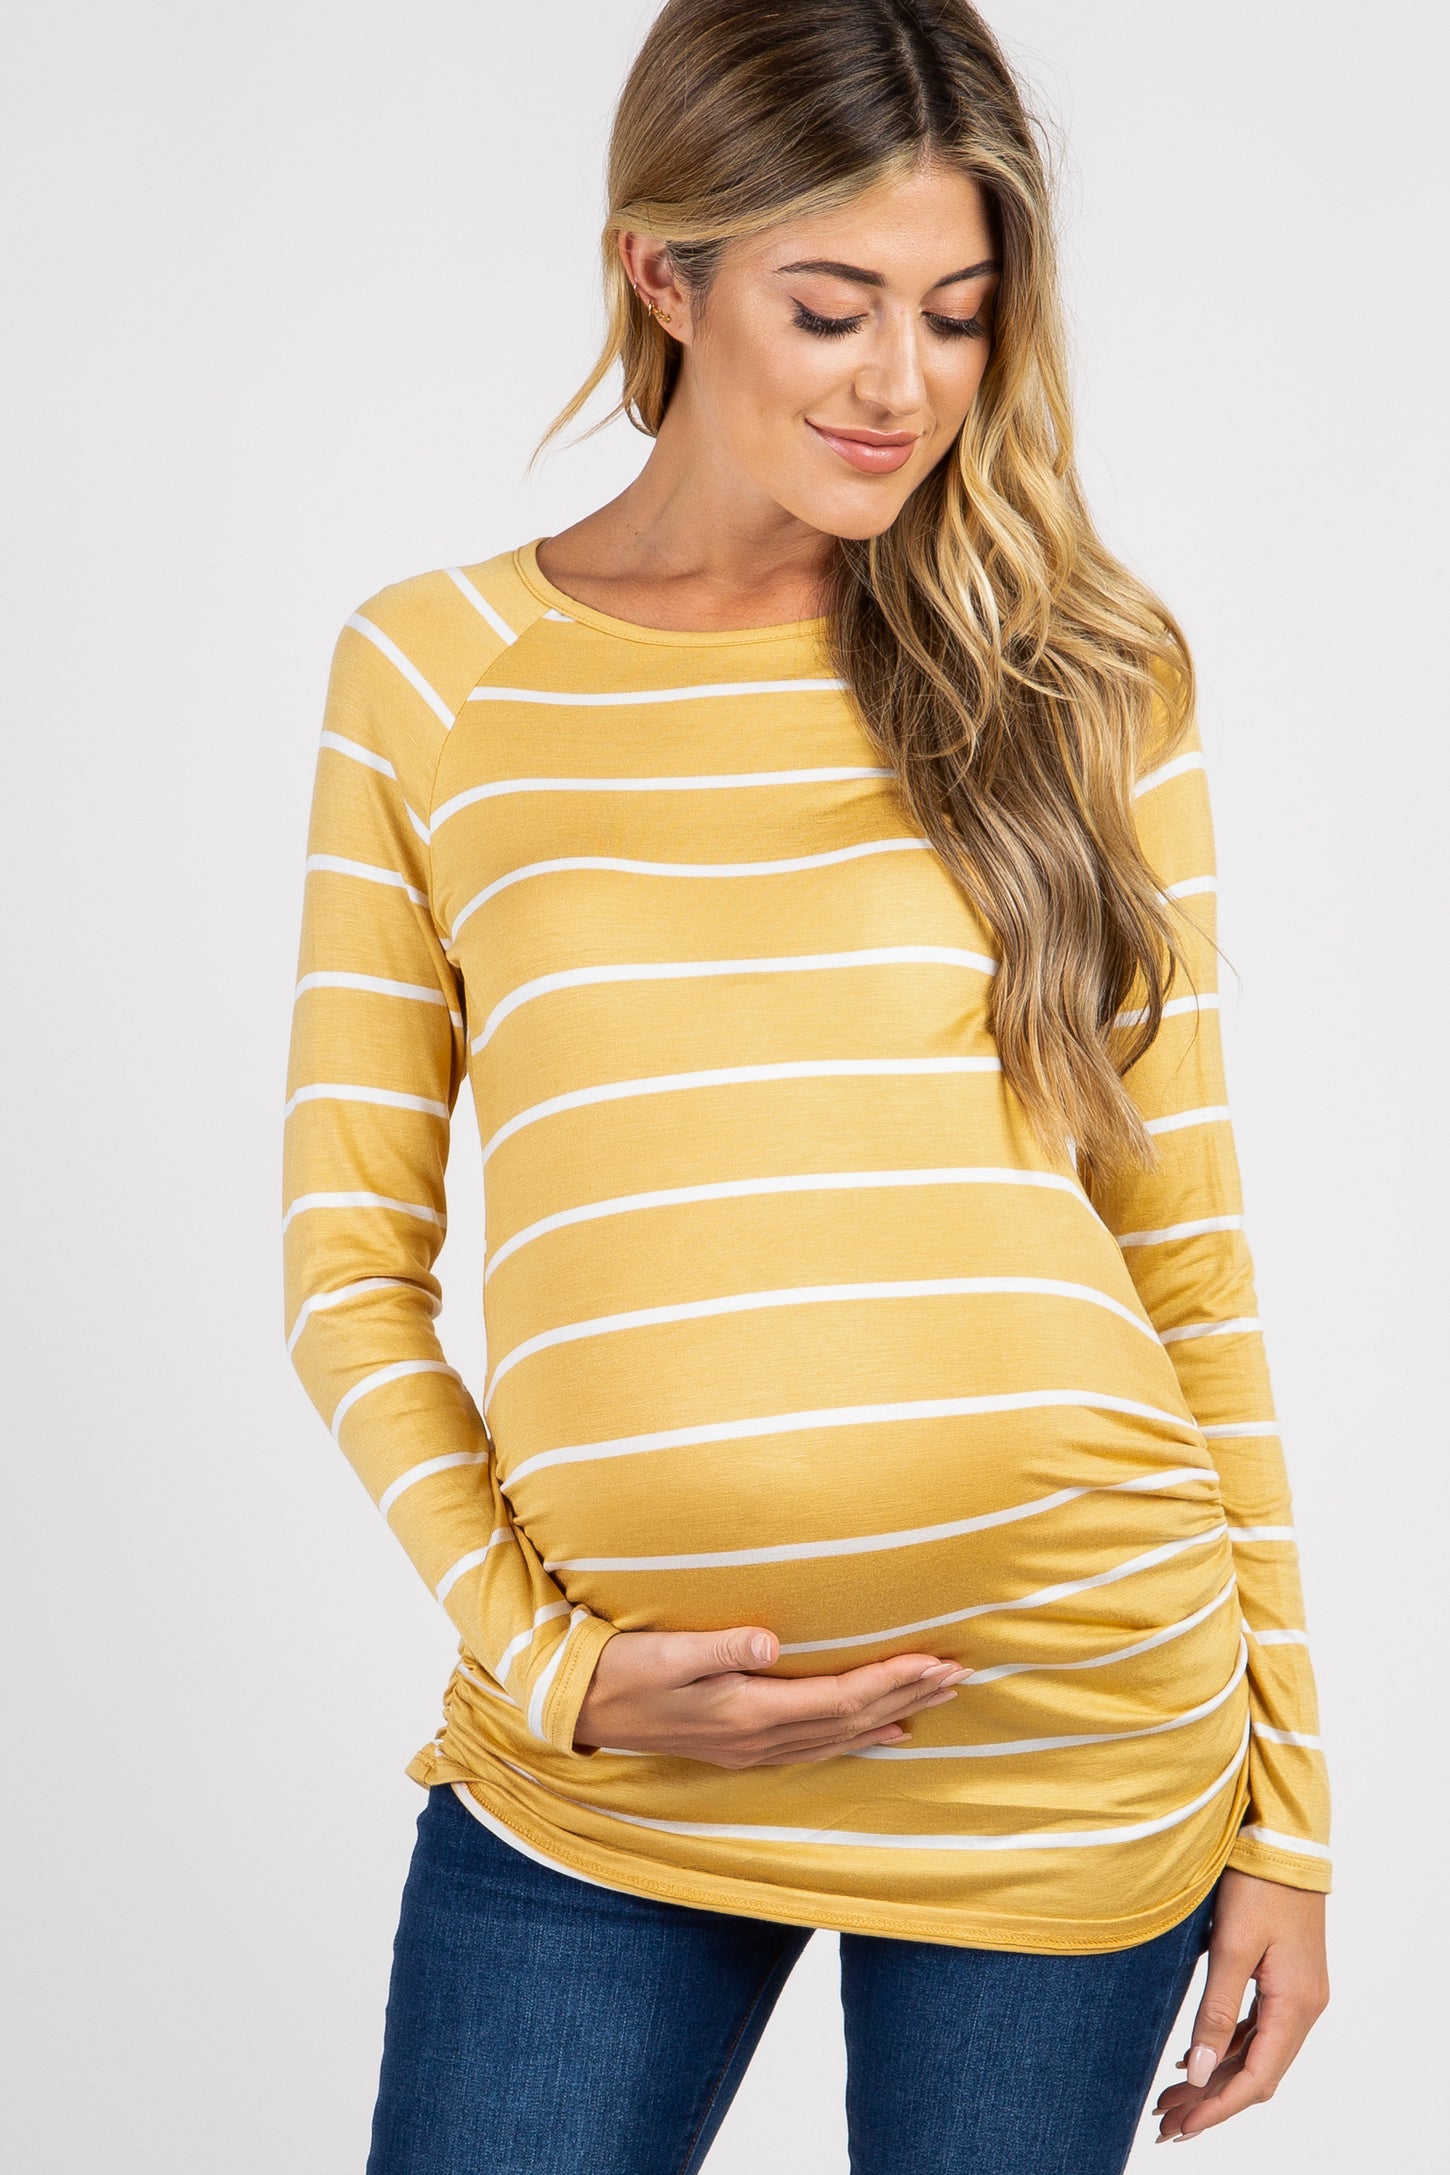 Mustard Striped Ruched Maternity Top